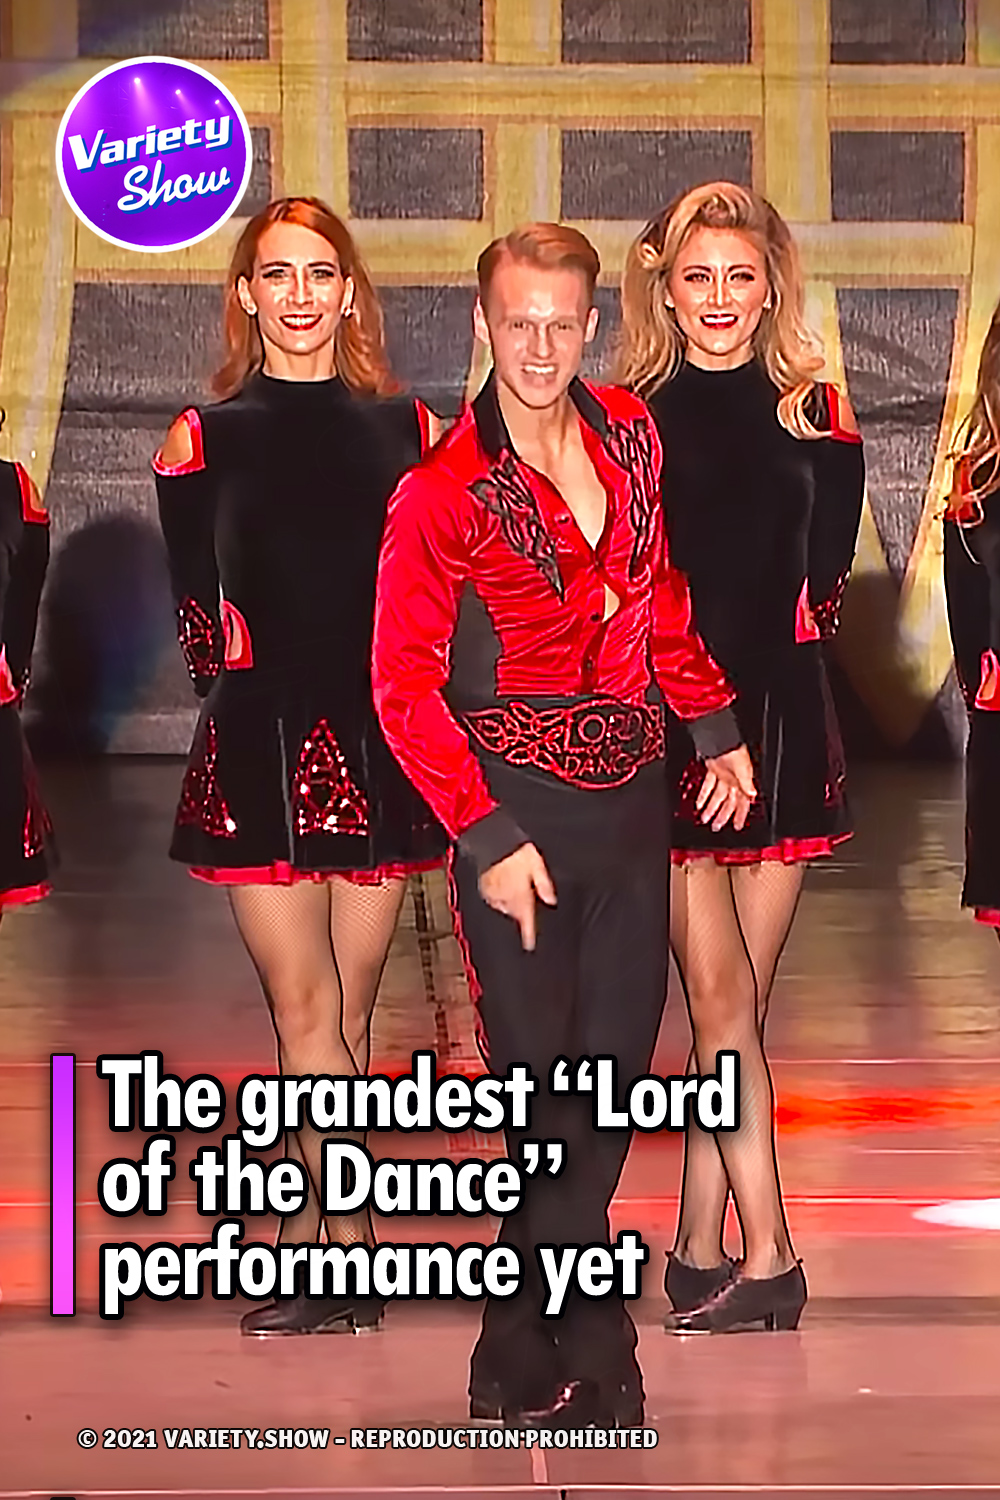 The grandest “Lord of the Dance” performance yet